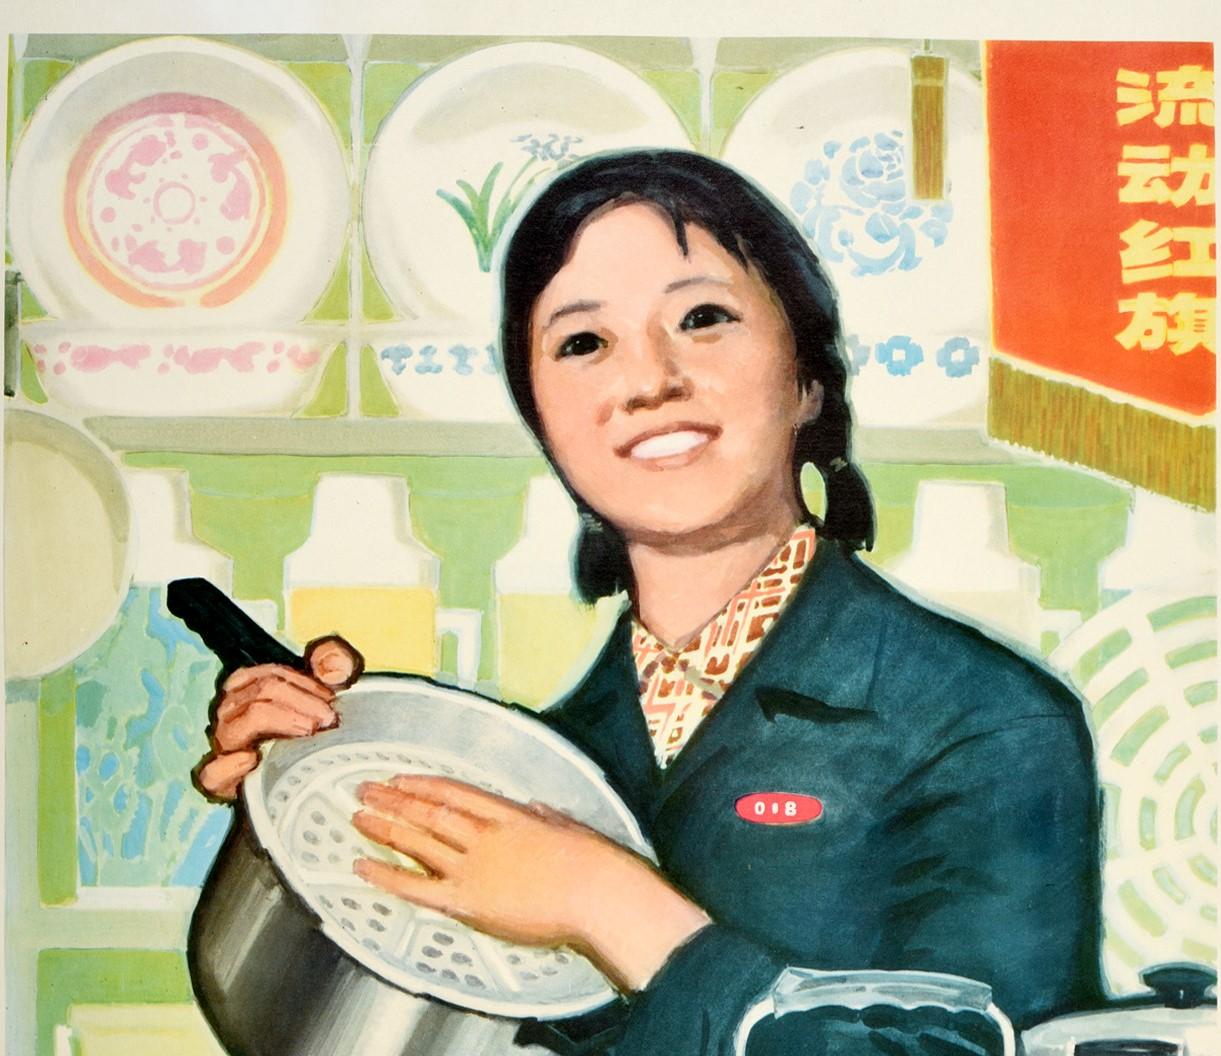 Original vintage Chinese propaganda poster - To Provide Quality Products and Wholeheartedly Serve the People - featuring a great illustration of a smiling young lady in work uniform overalls presenting a selection of kitchen equipment including